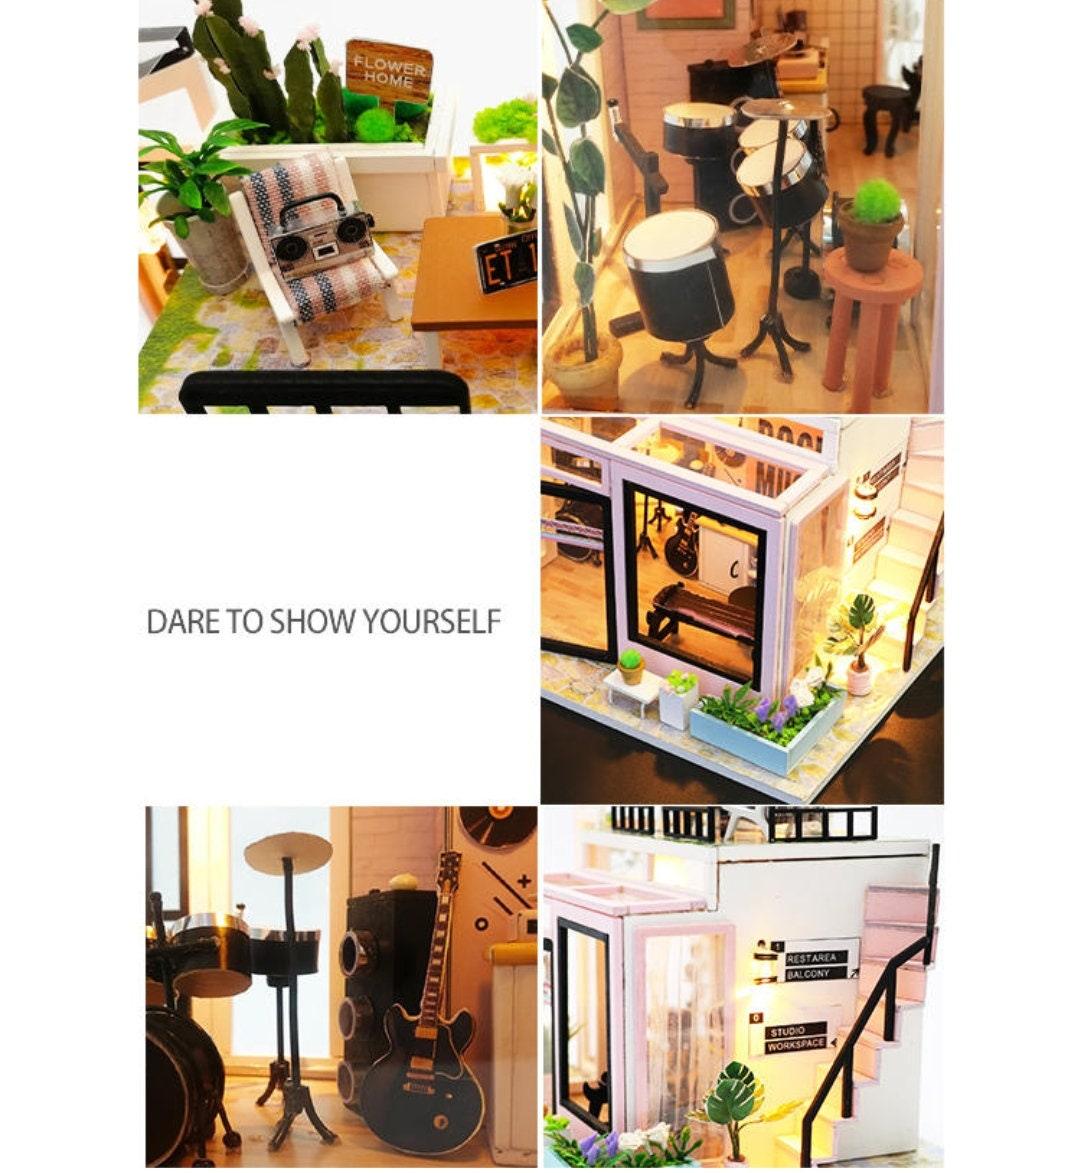 Houguang Music Studio DIY Dollhouse Kit Dollhouse Miniature With Guitar Drum Kit Adult Craft Birthday Gift Christmas Gift